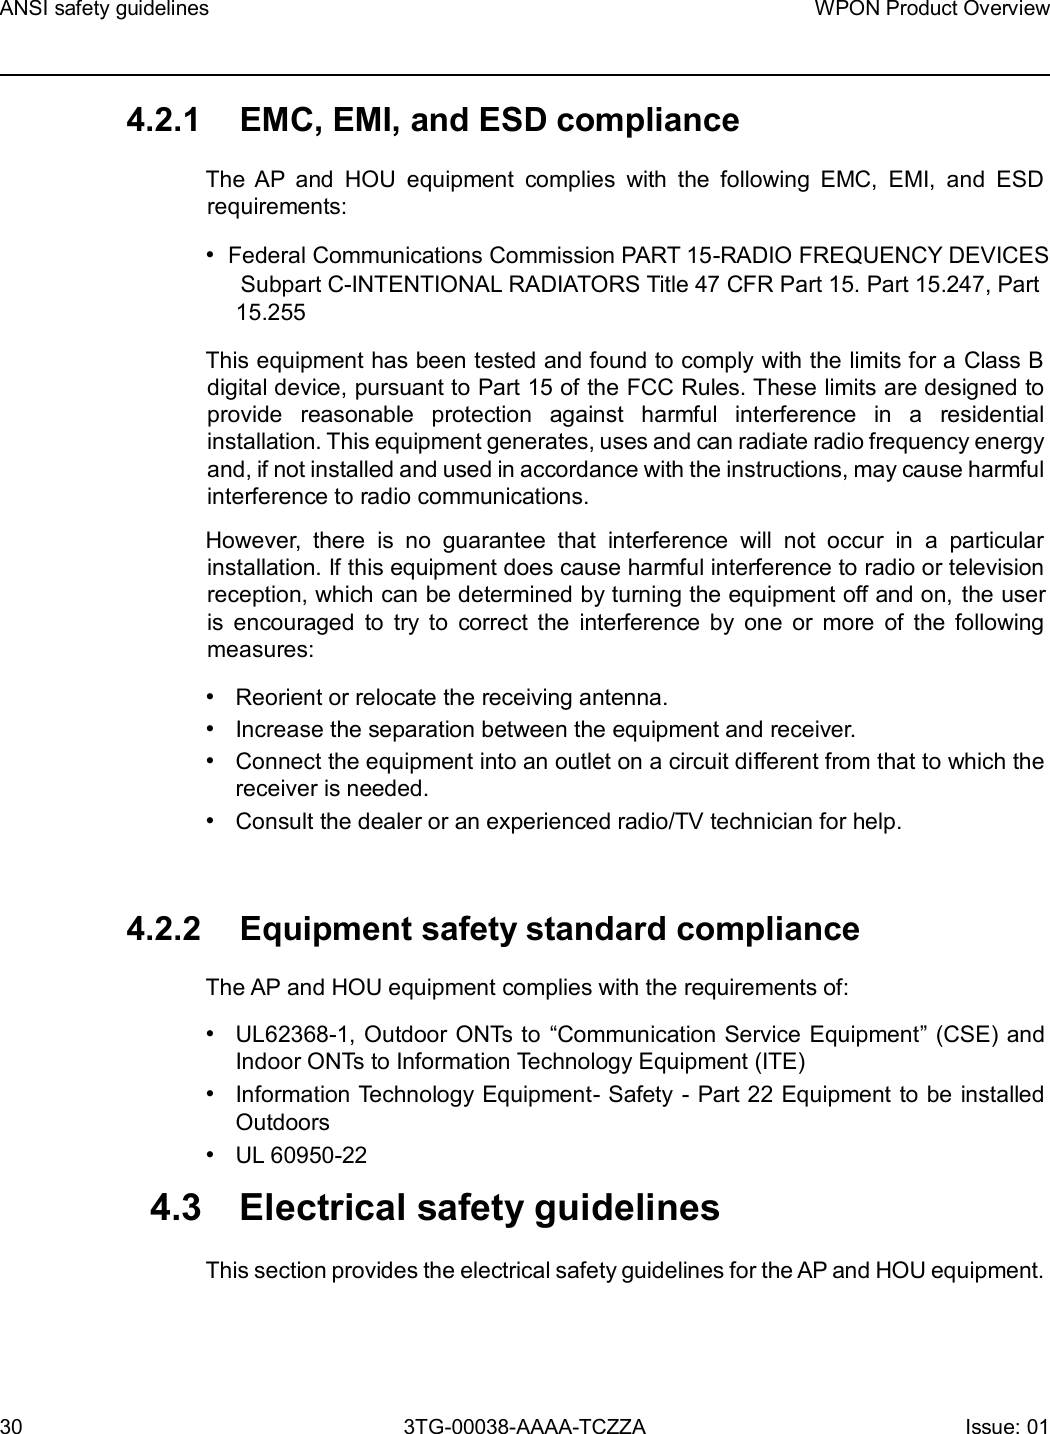 Page 30 of Nokia Bell 7577WPONAPAC WPON User Manual WPON Product Overview